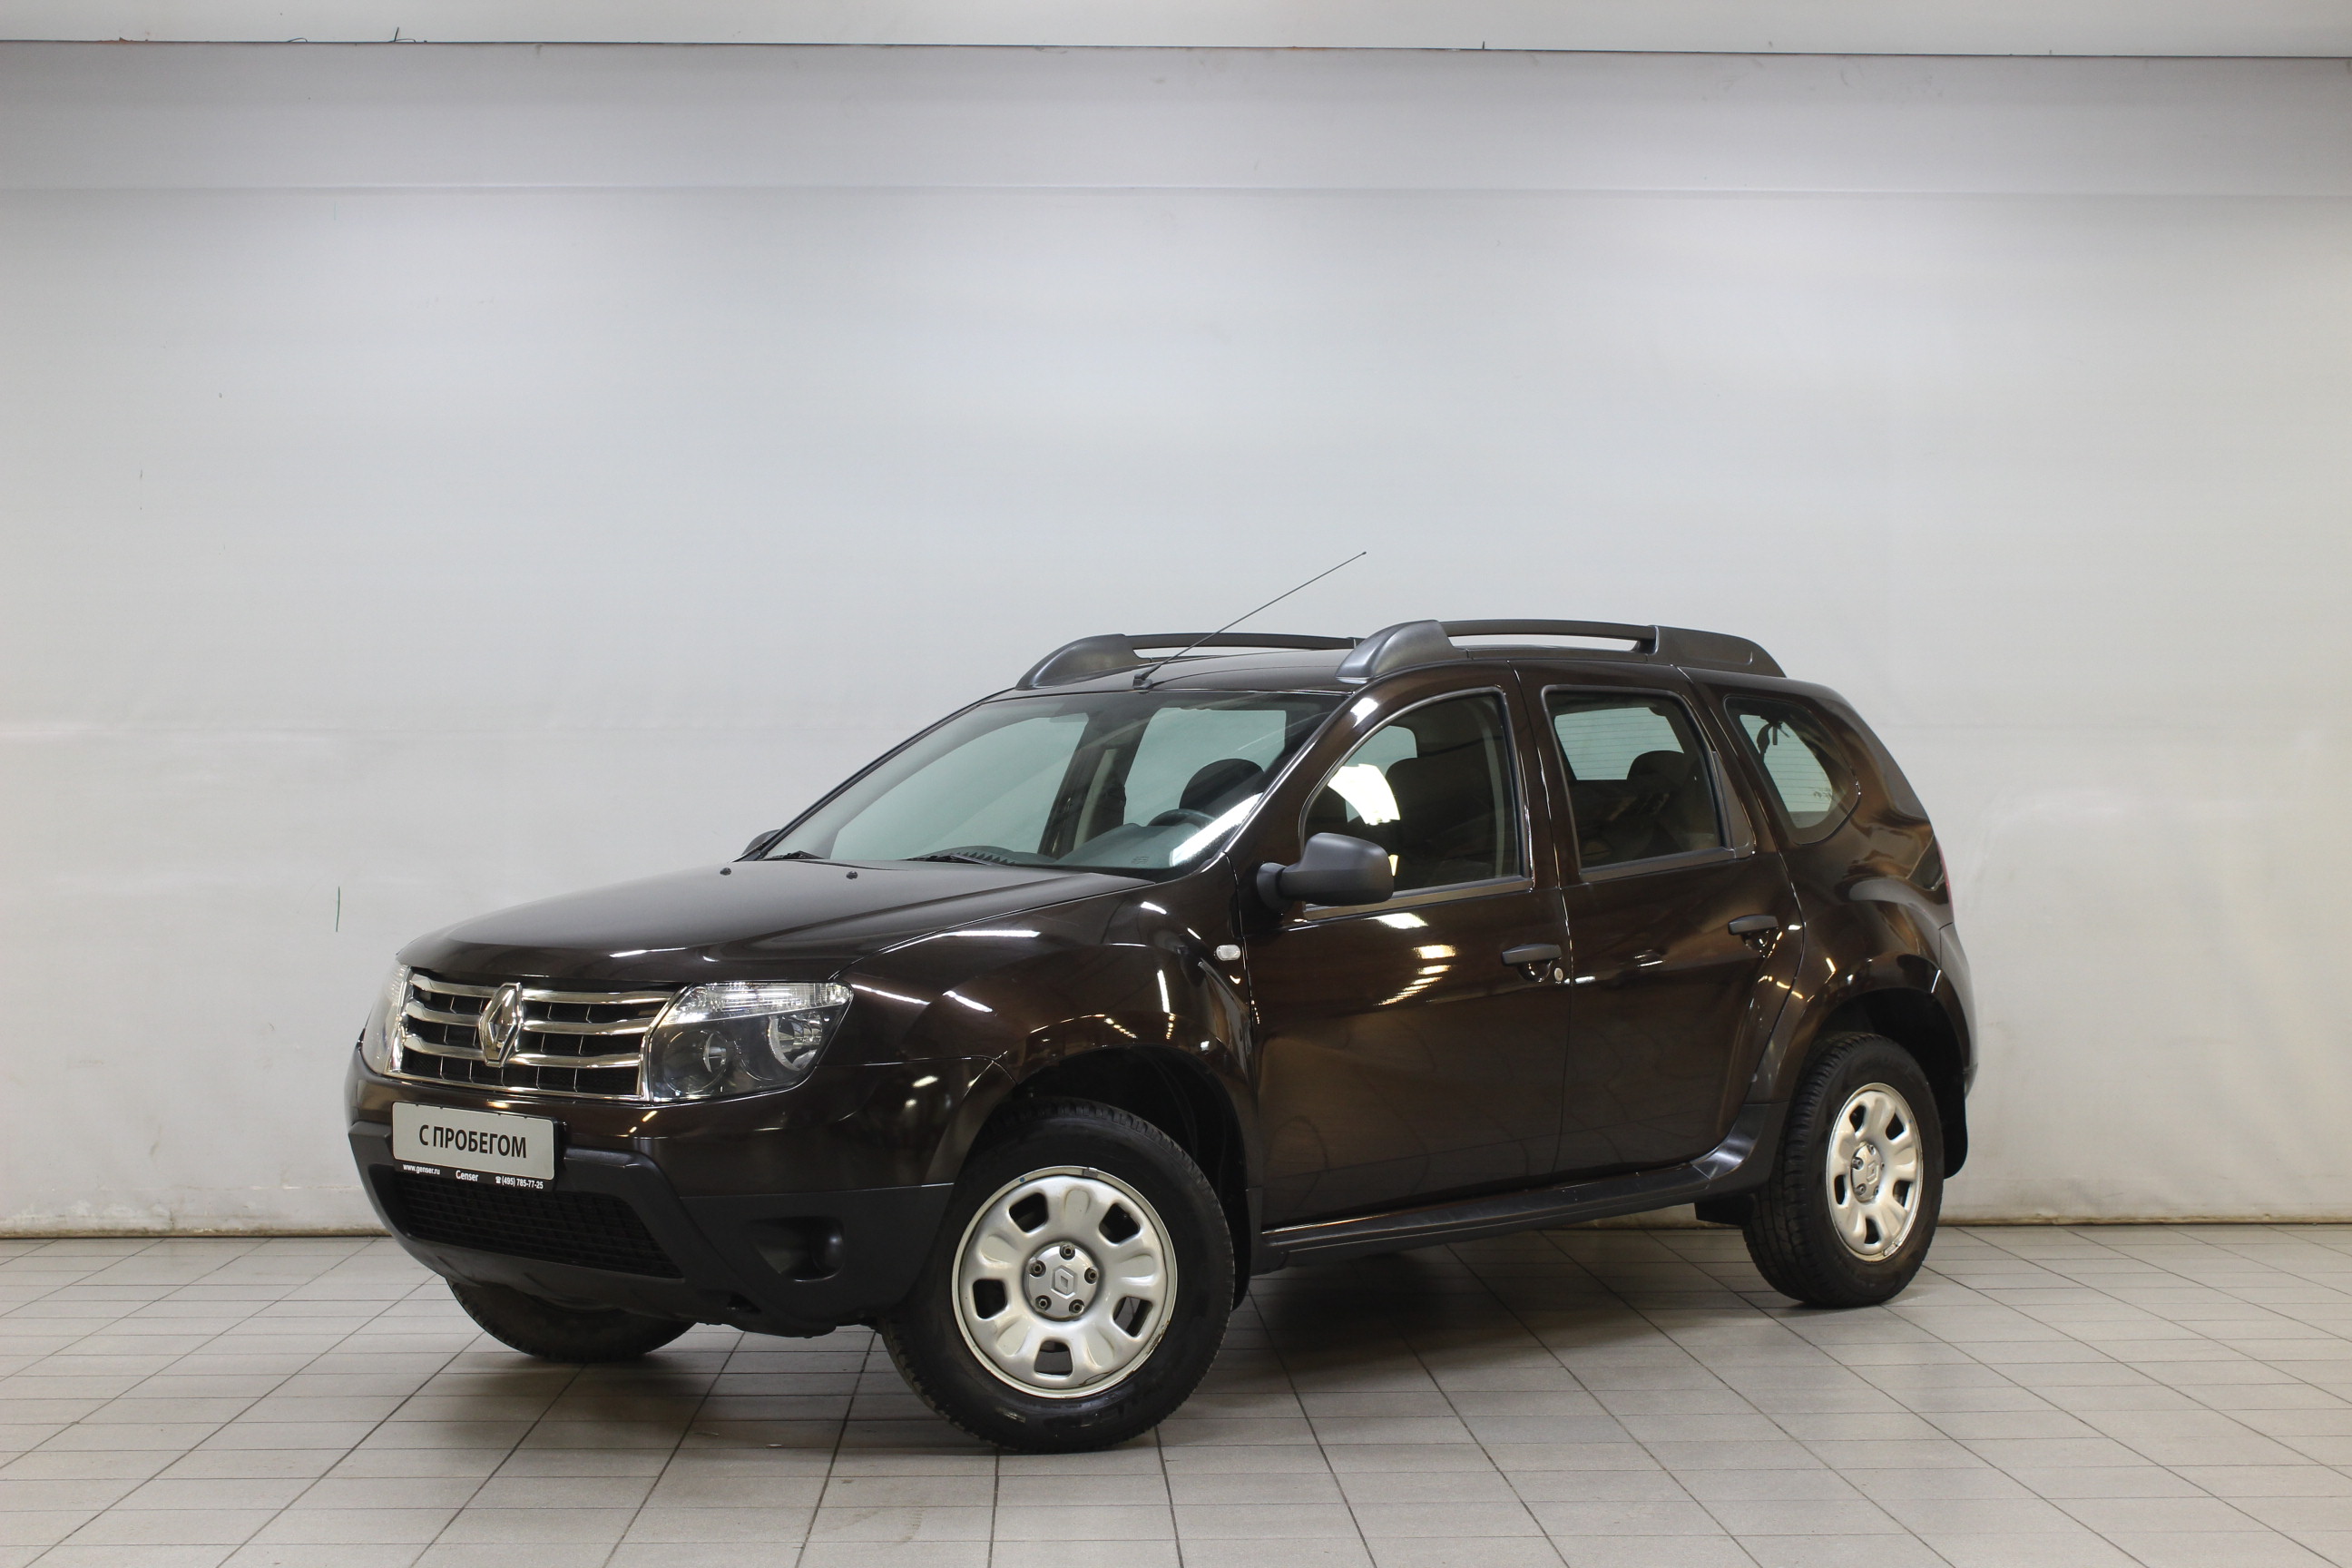 Renault duster 2014 год. Рено Дастер 2014. Renault Duster 2014. Renault Duster 2.0. Рено Дастер 2014 2 литра.